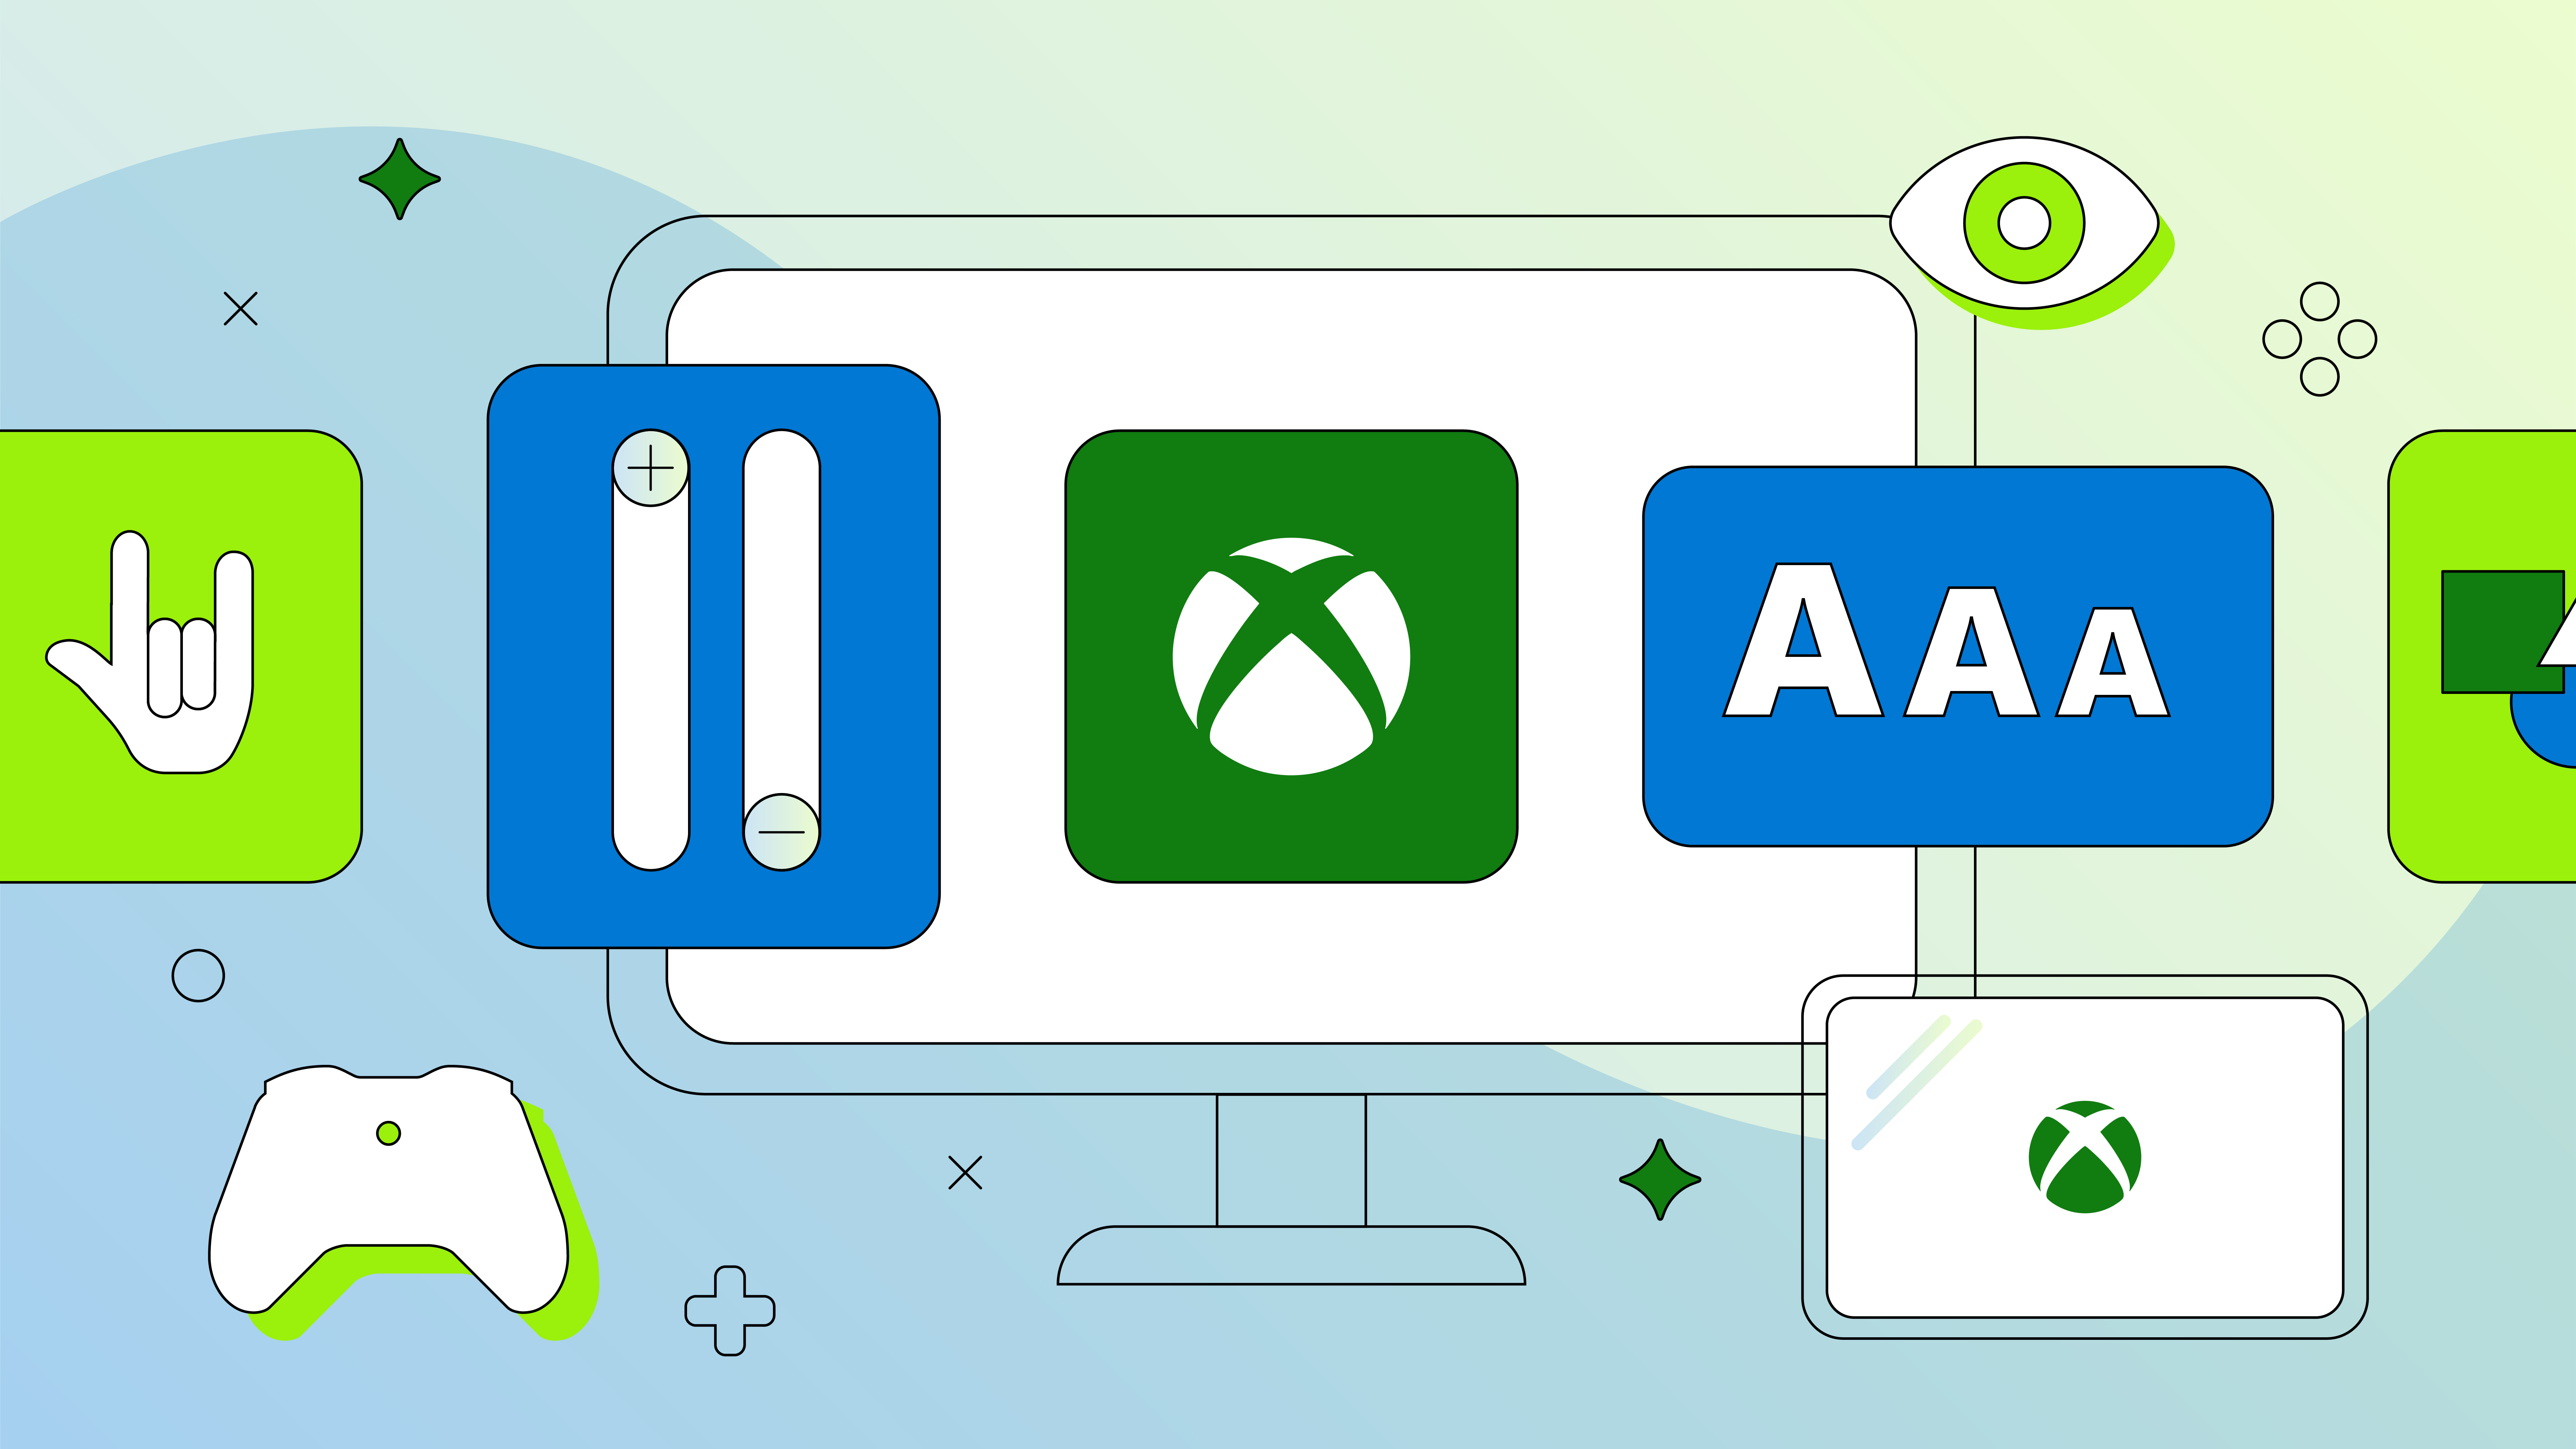 Blue and green themed abstract line art with an Xbox logo in white with a green background on a computer monitor, a blue rectangle with the letter A in three sizes, a second blue rectangle with two slide adjusters, an icon of a hand signing "I love you" in ASL, and icons for an Xbox controller, and an eye.